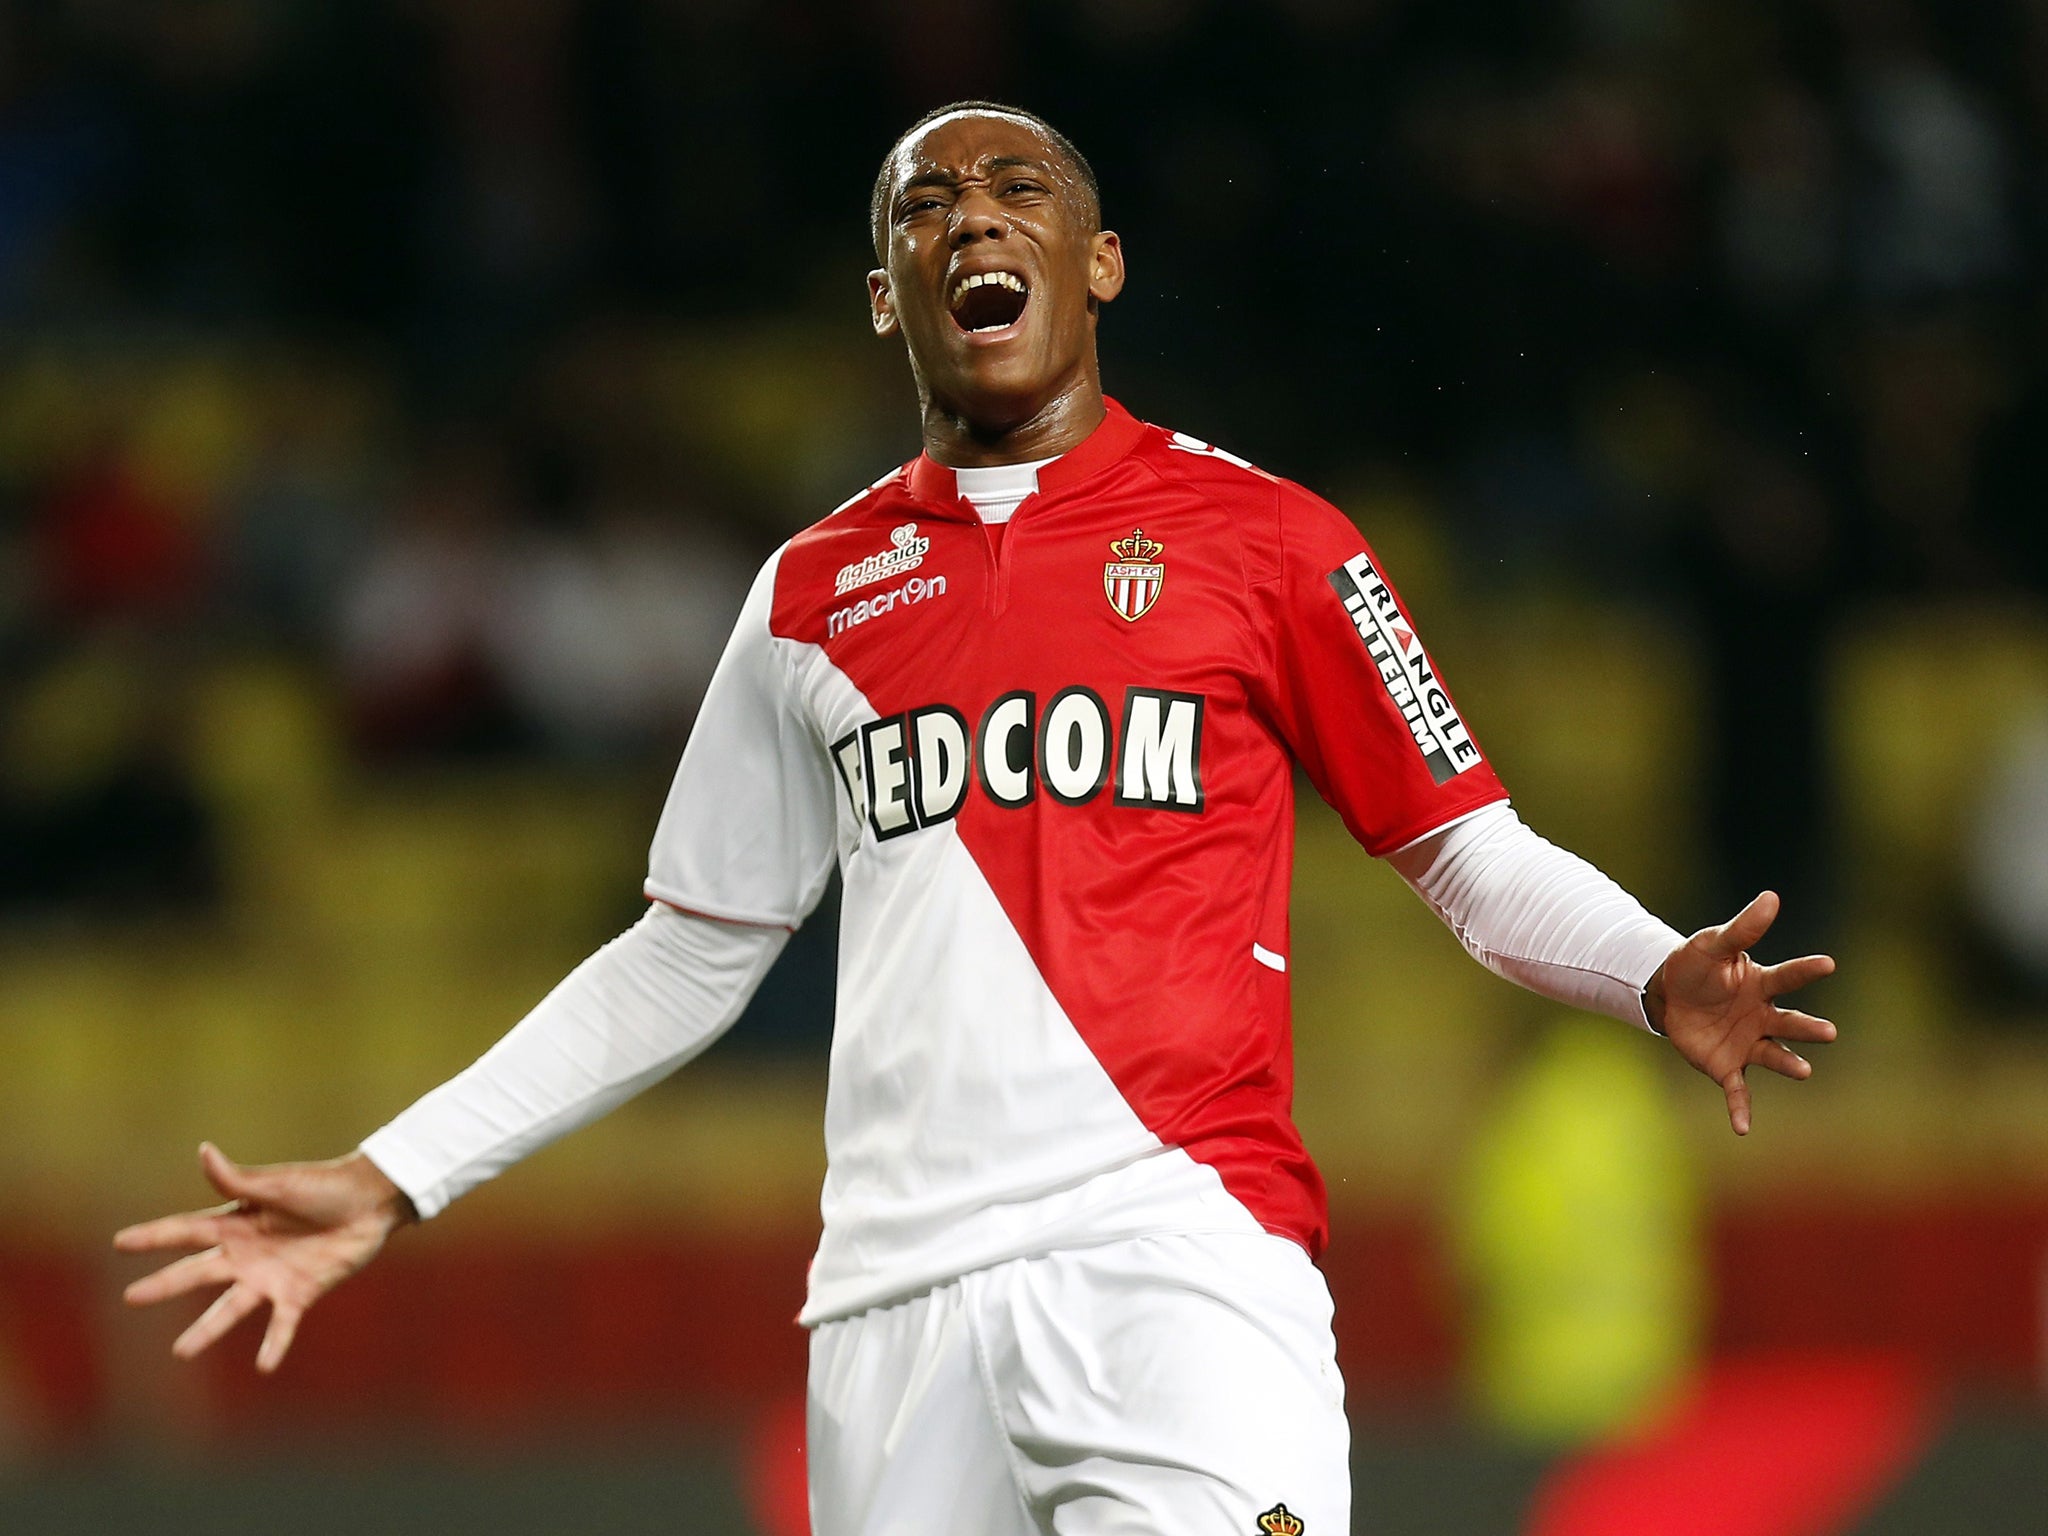 Monaco forward Anthony Martial is apparently close to an £18m transfer to Tottenham